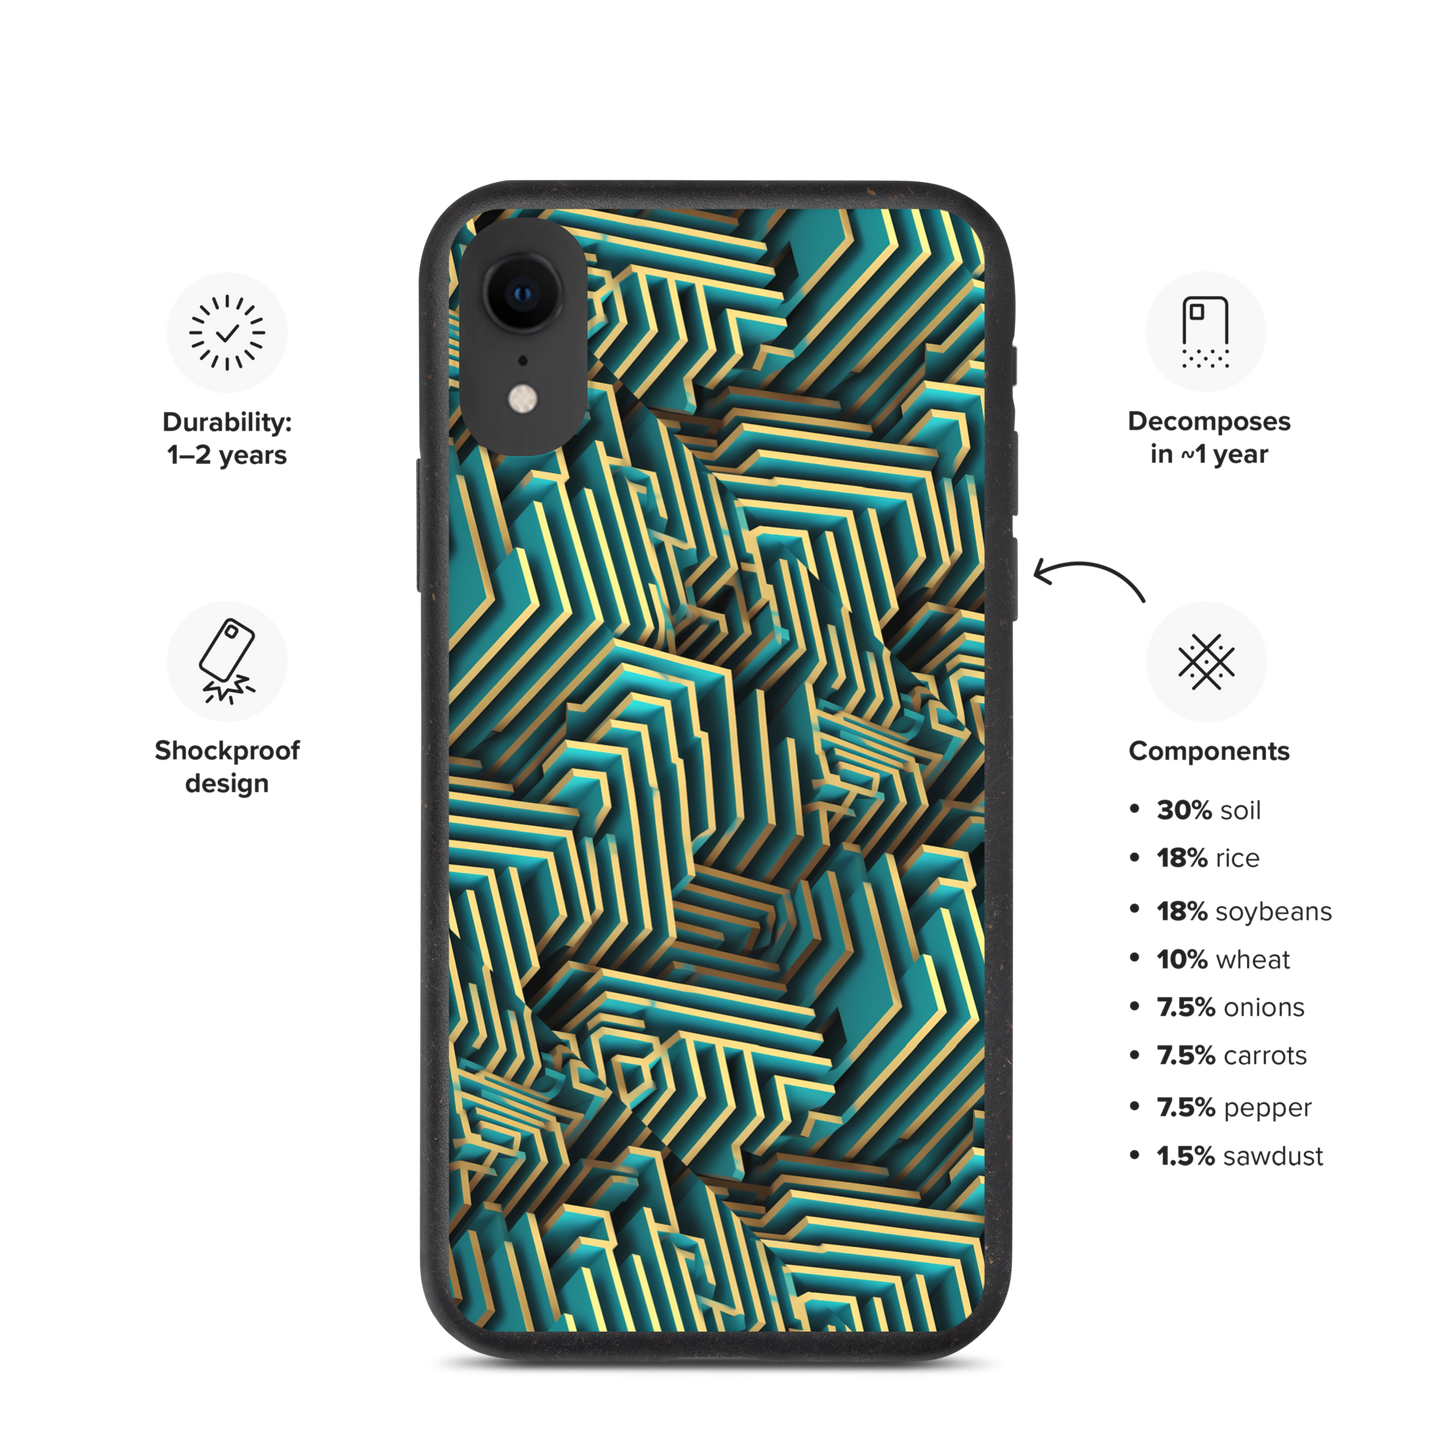 3D Maze Illusion | 3D Patterns | Speckled Case for iPhone - #5